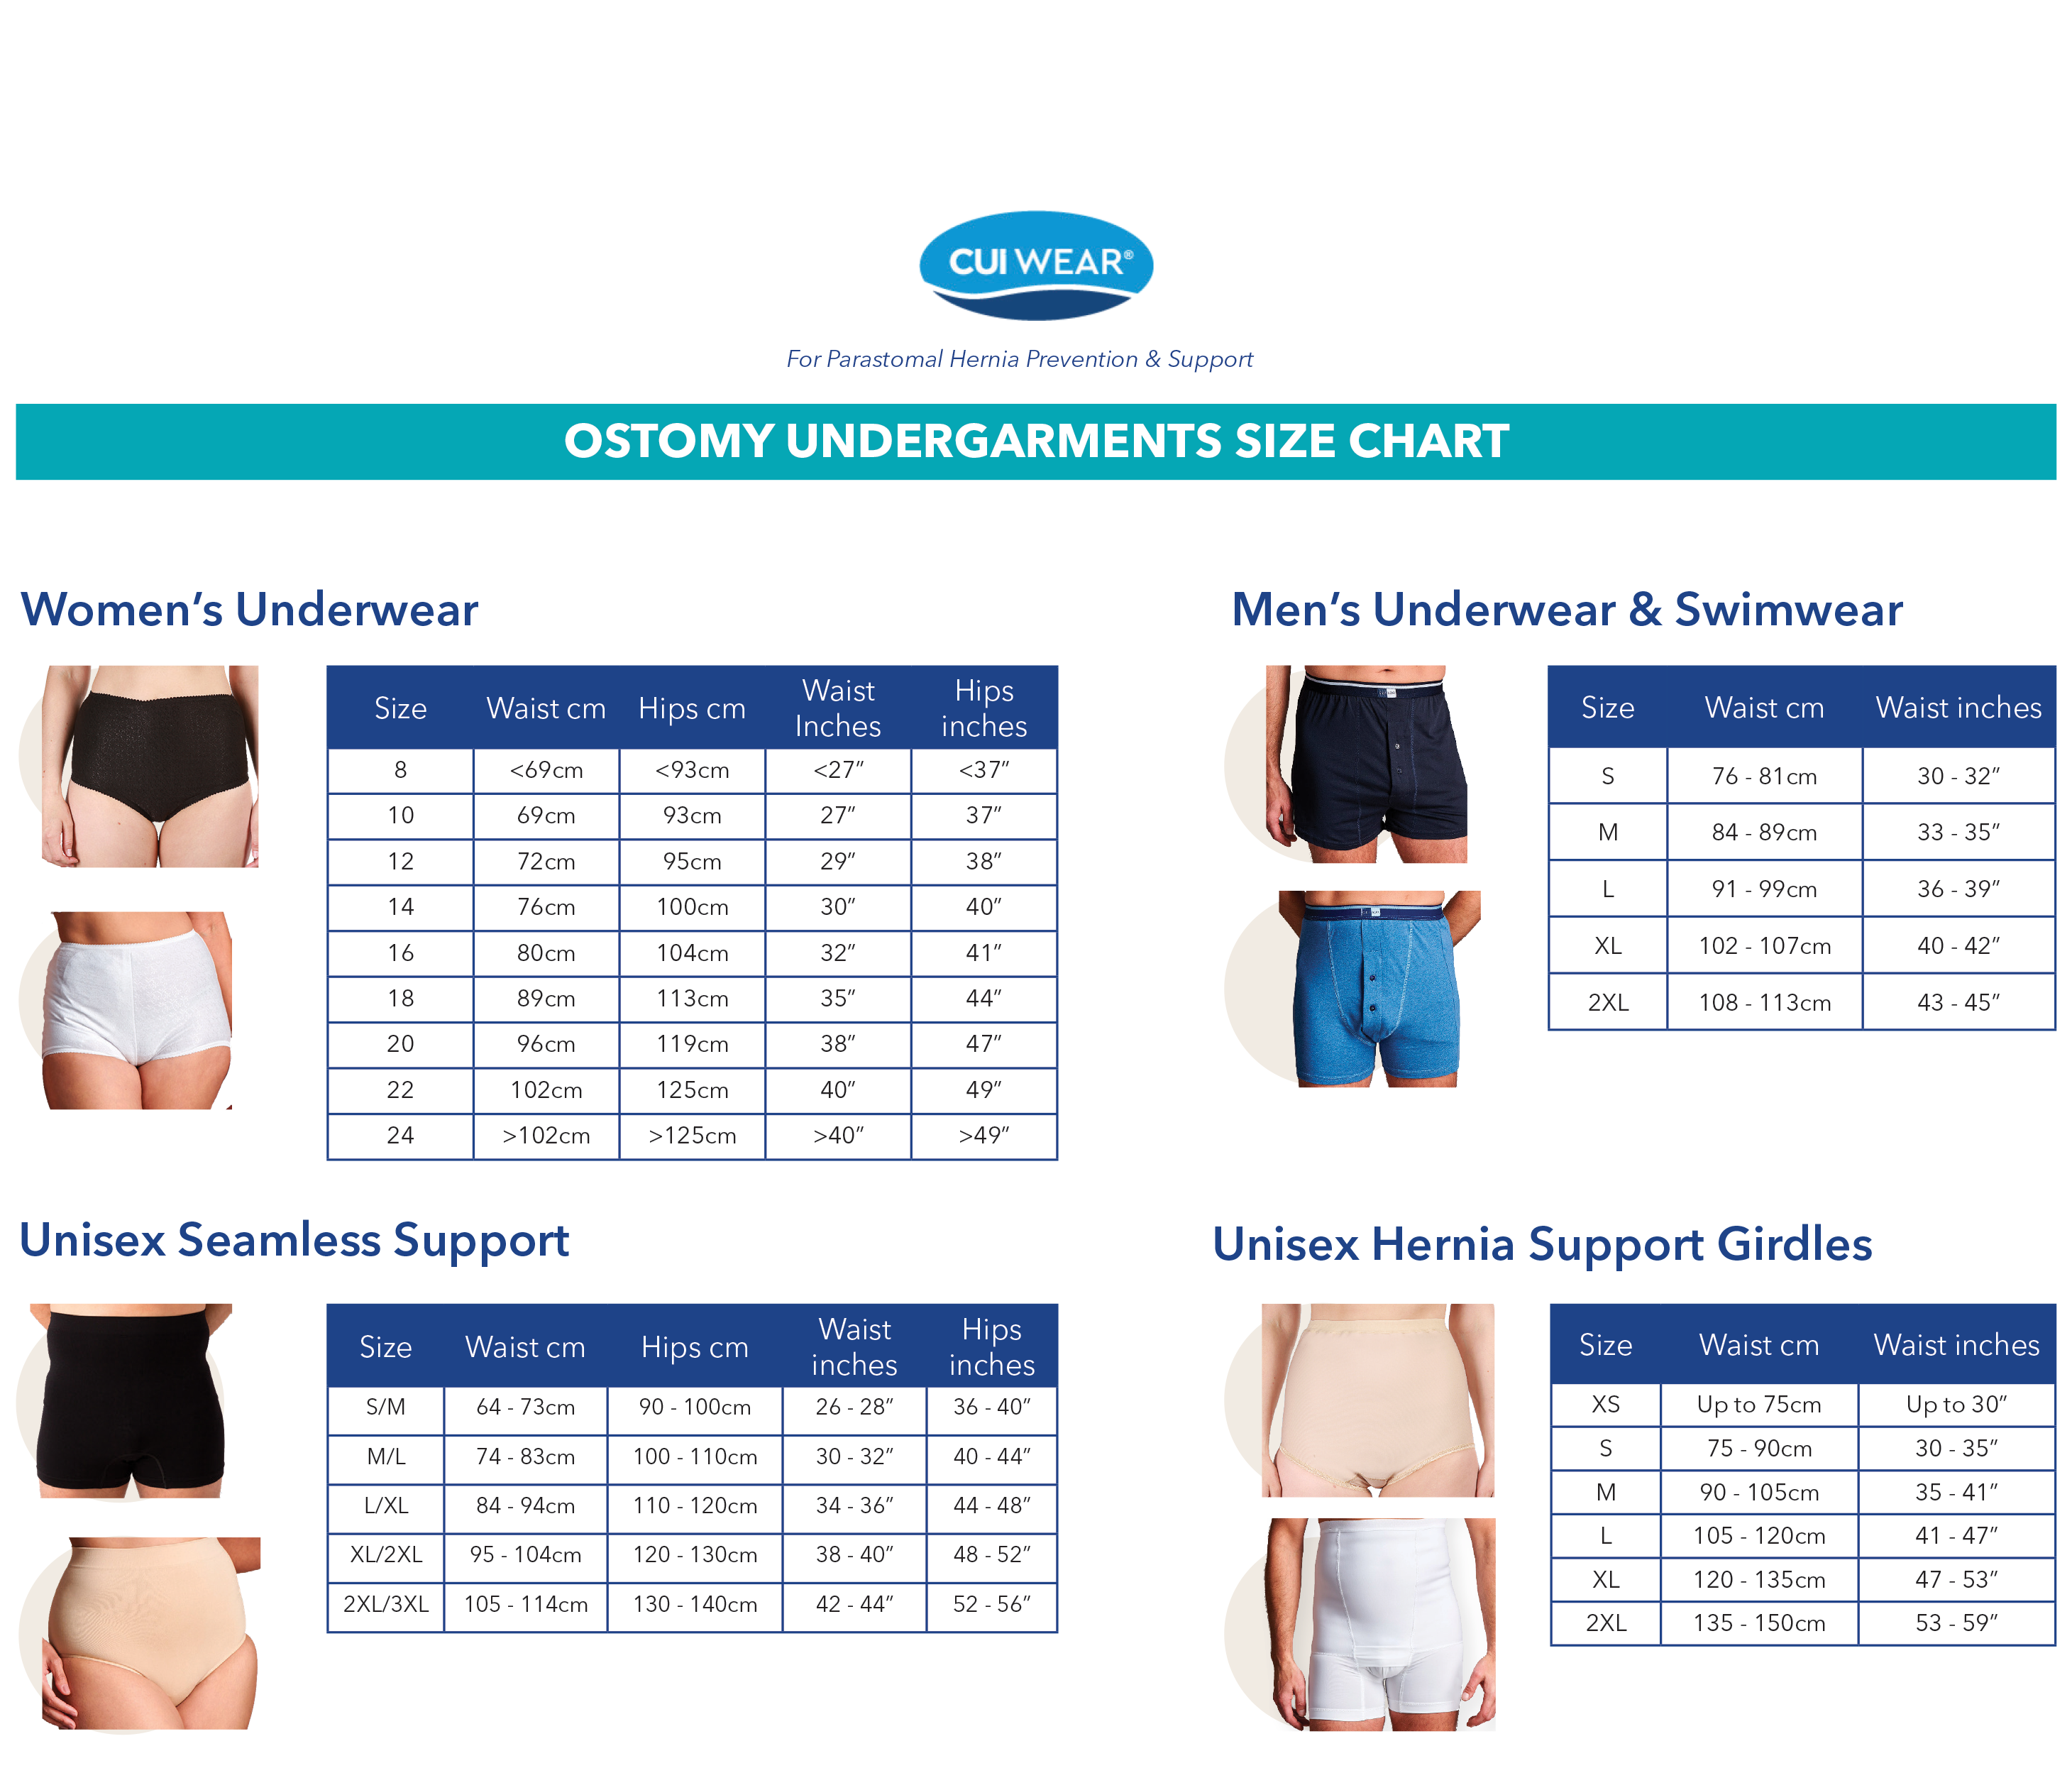 CUI Mens Hernia Low Waist Support Girdle With Legs - 1 each, LARGE, WHITE - 0